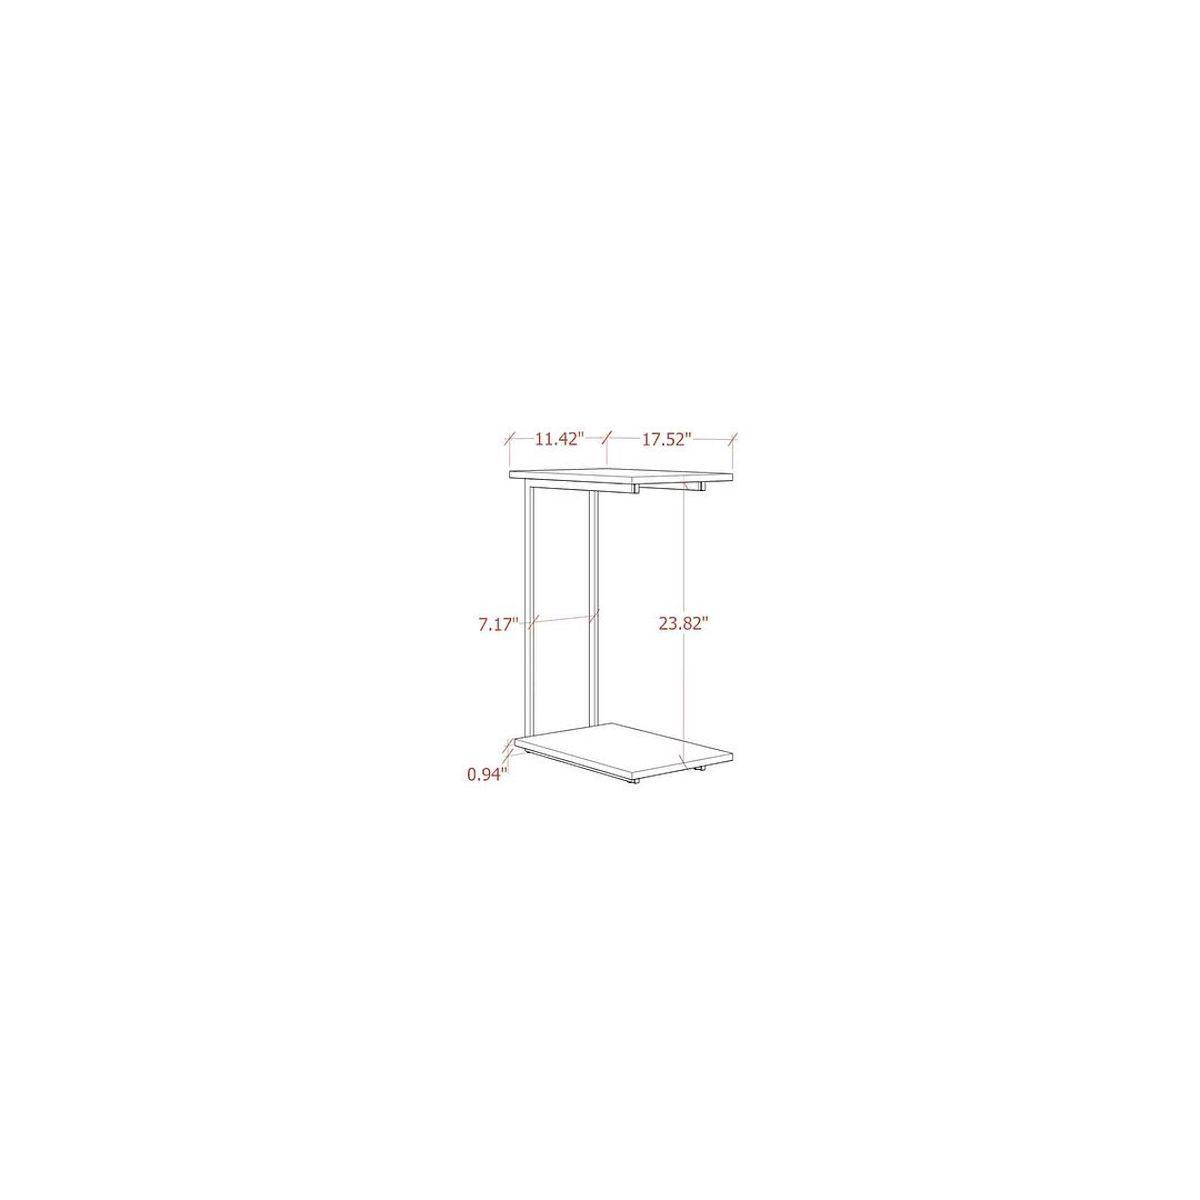 Manhattan Comfort Celine Tuck-in End Table with Steel Legs 25545 Dimensions